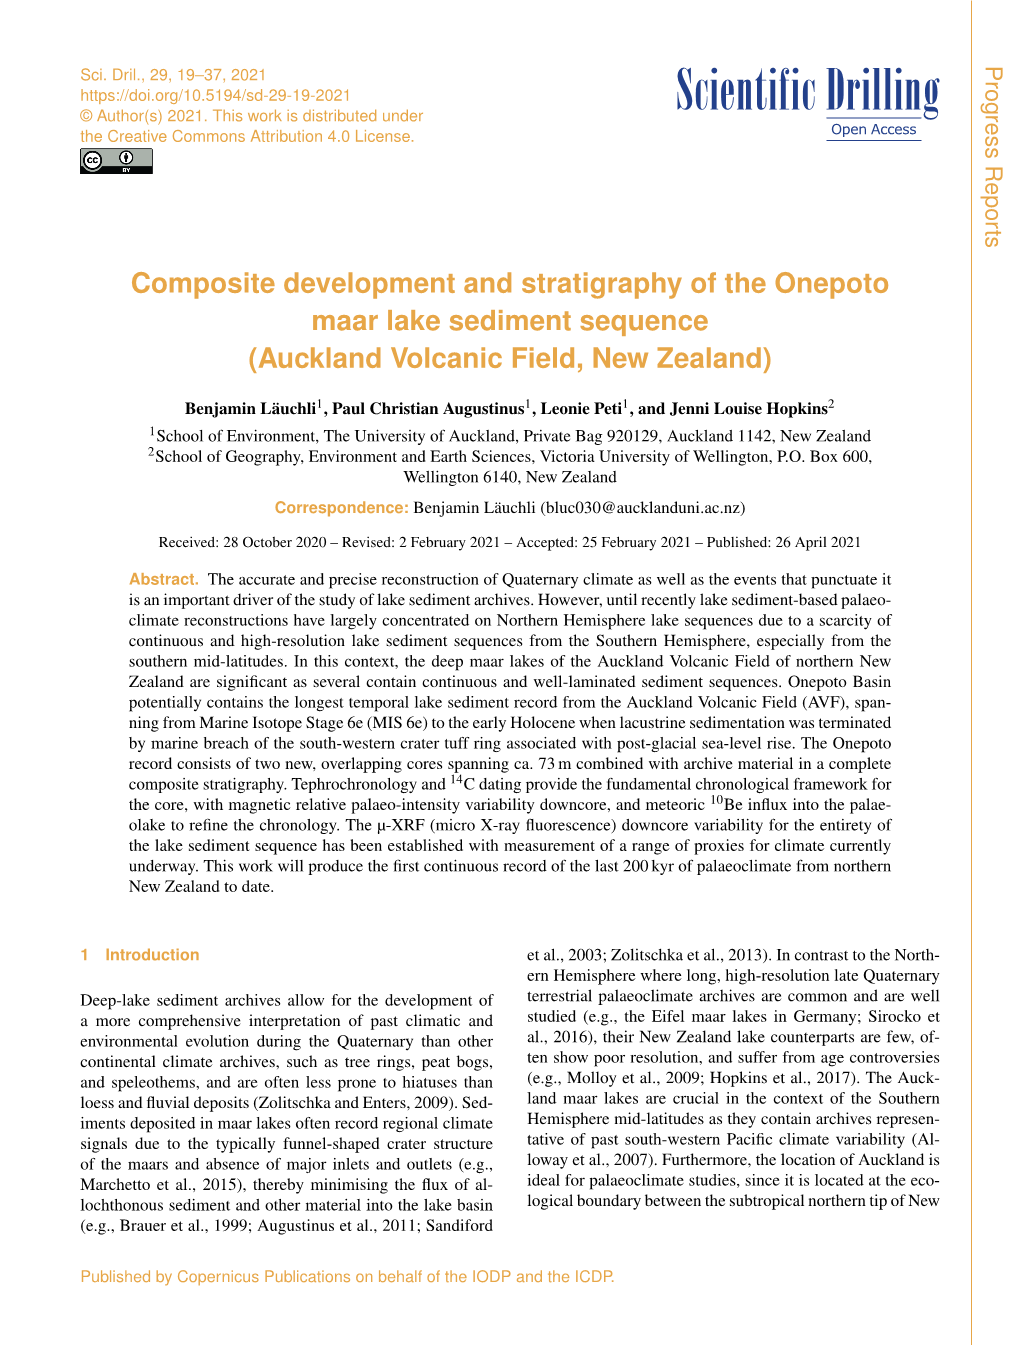 Composite Development and Stratigraphy of the Onepoto Maar Lake Sediment Sequence (Auckland Volcanic Field, New Zealand)